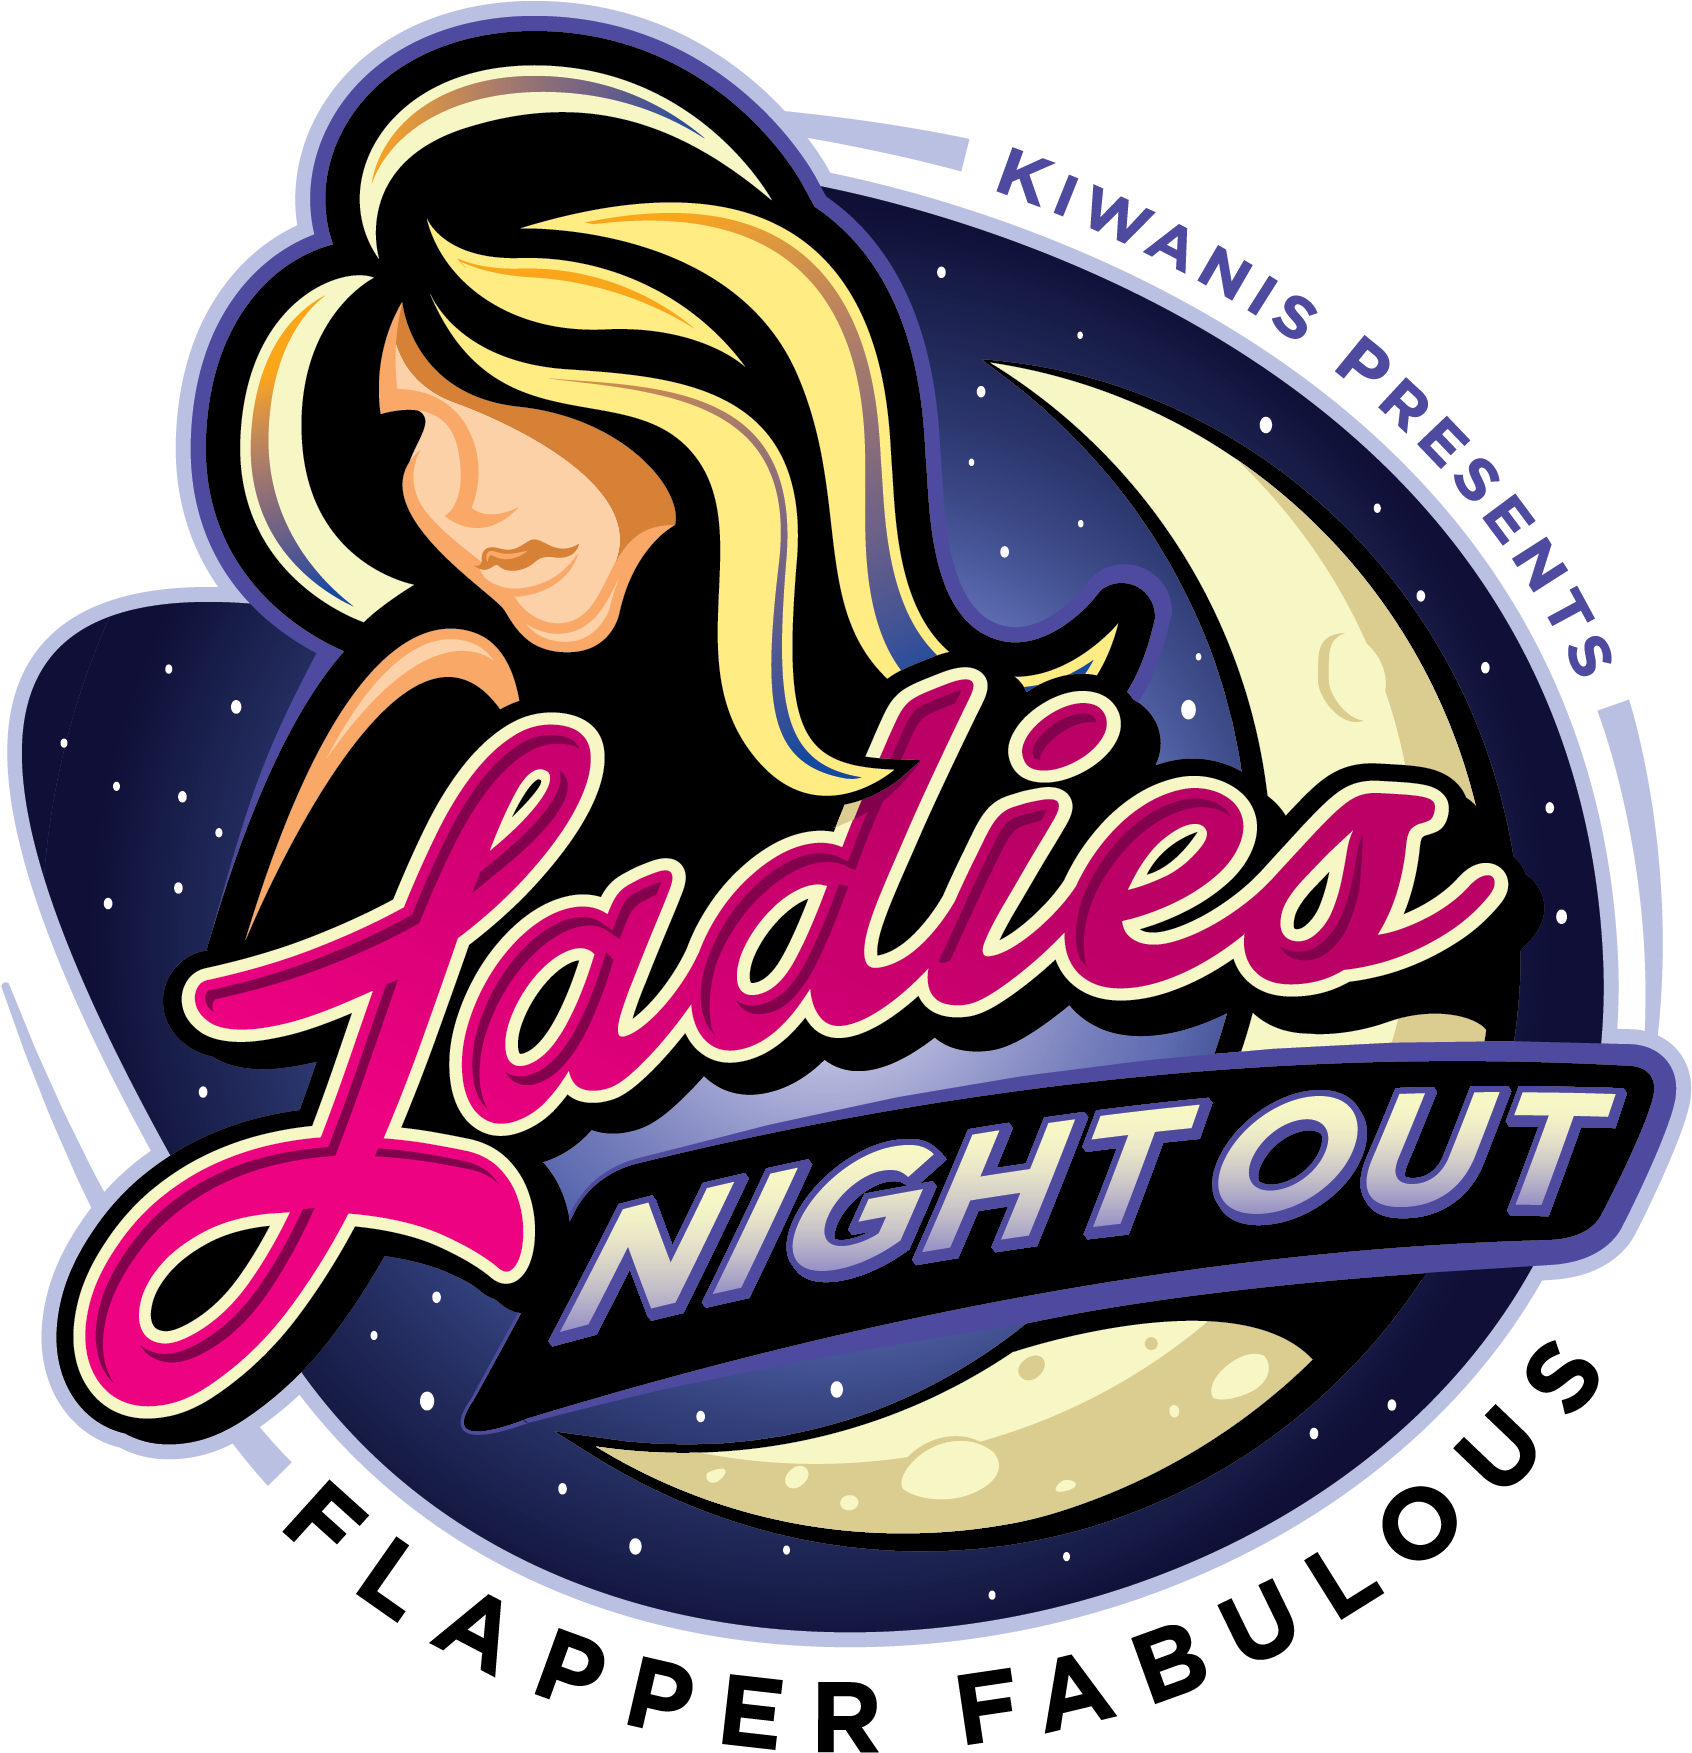 Great Falls Kiwanis Ladies Night Out Event Logo, - Whole Trade Guarantee Whole Foods (1837x1770)